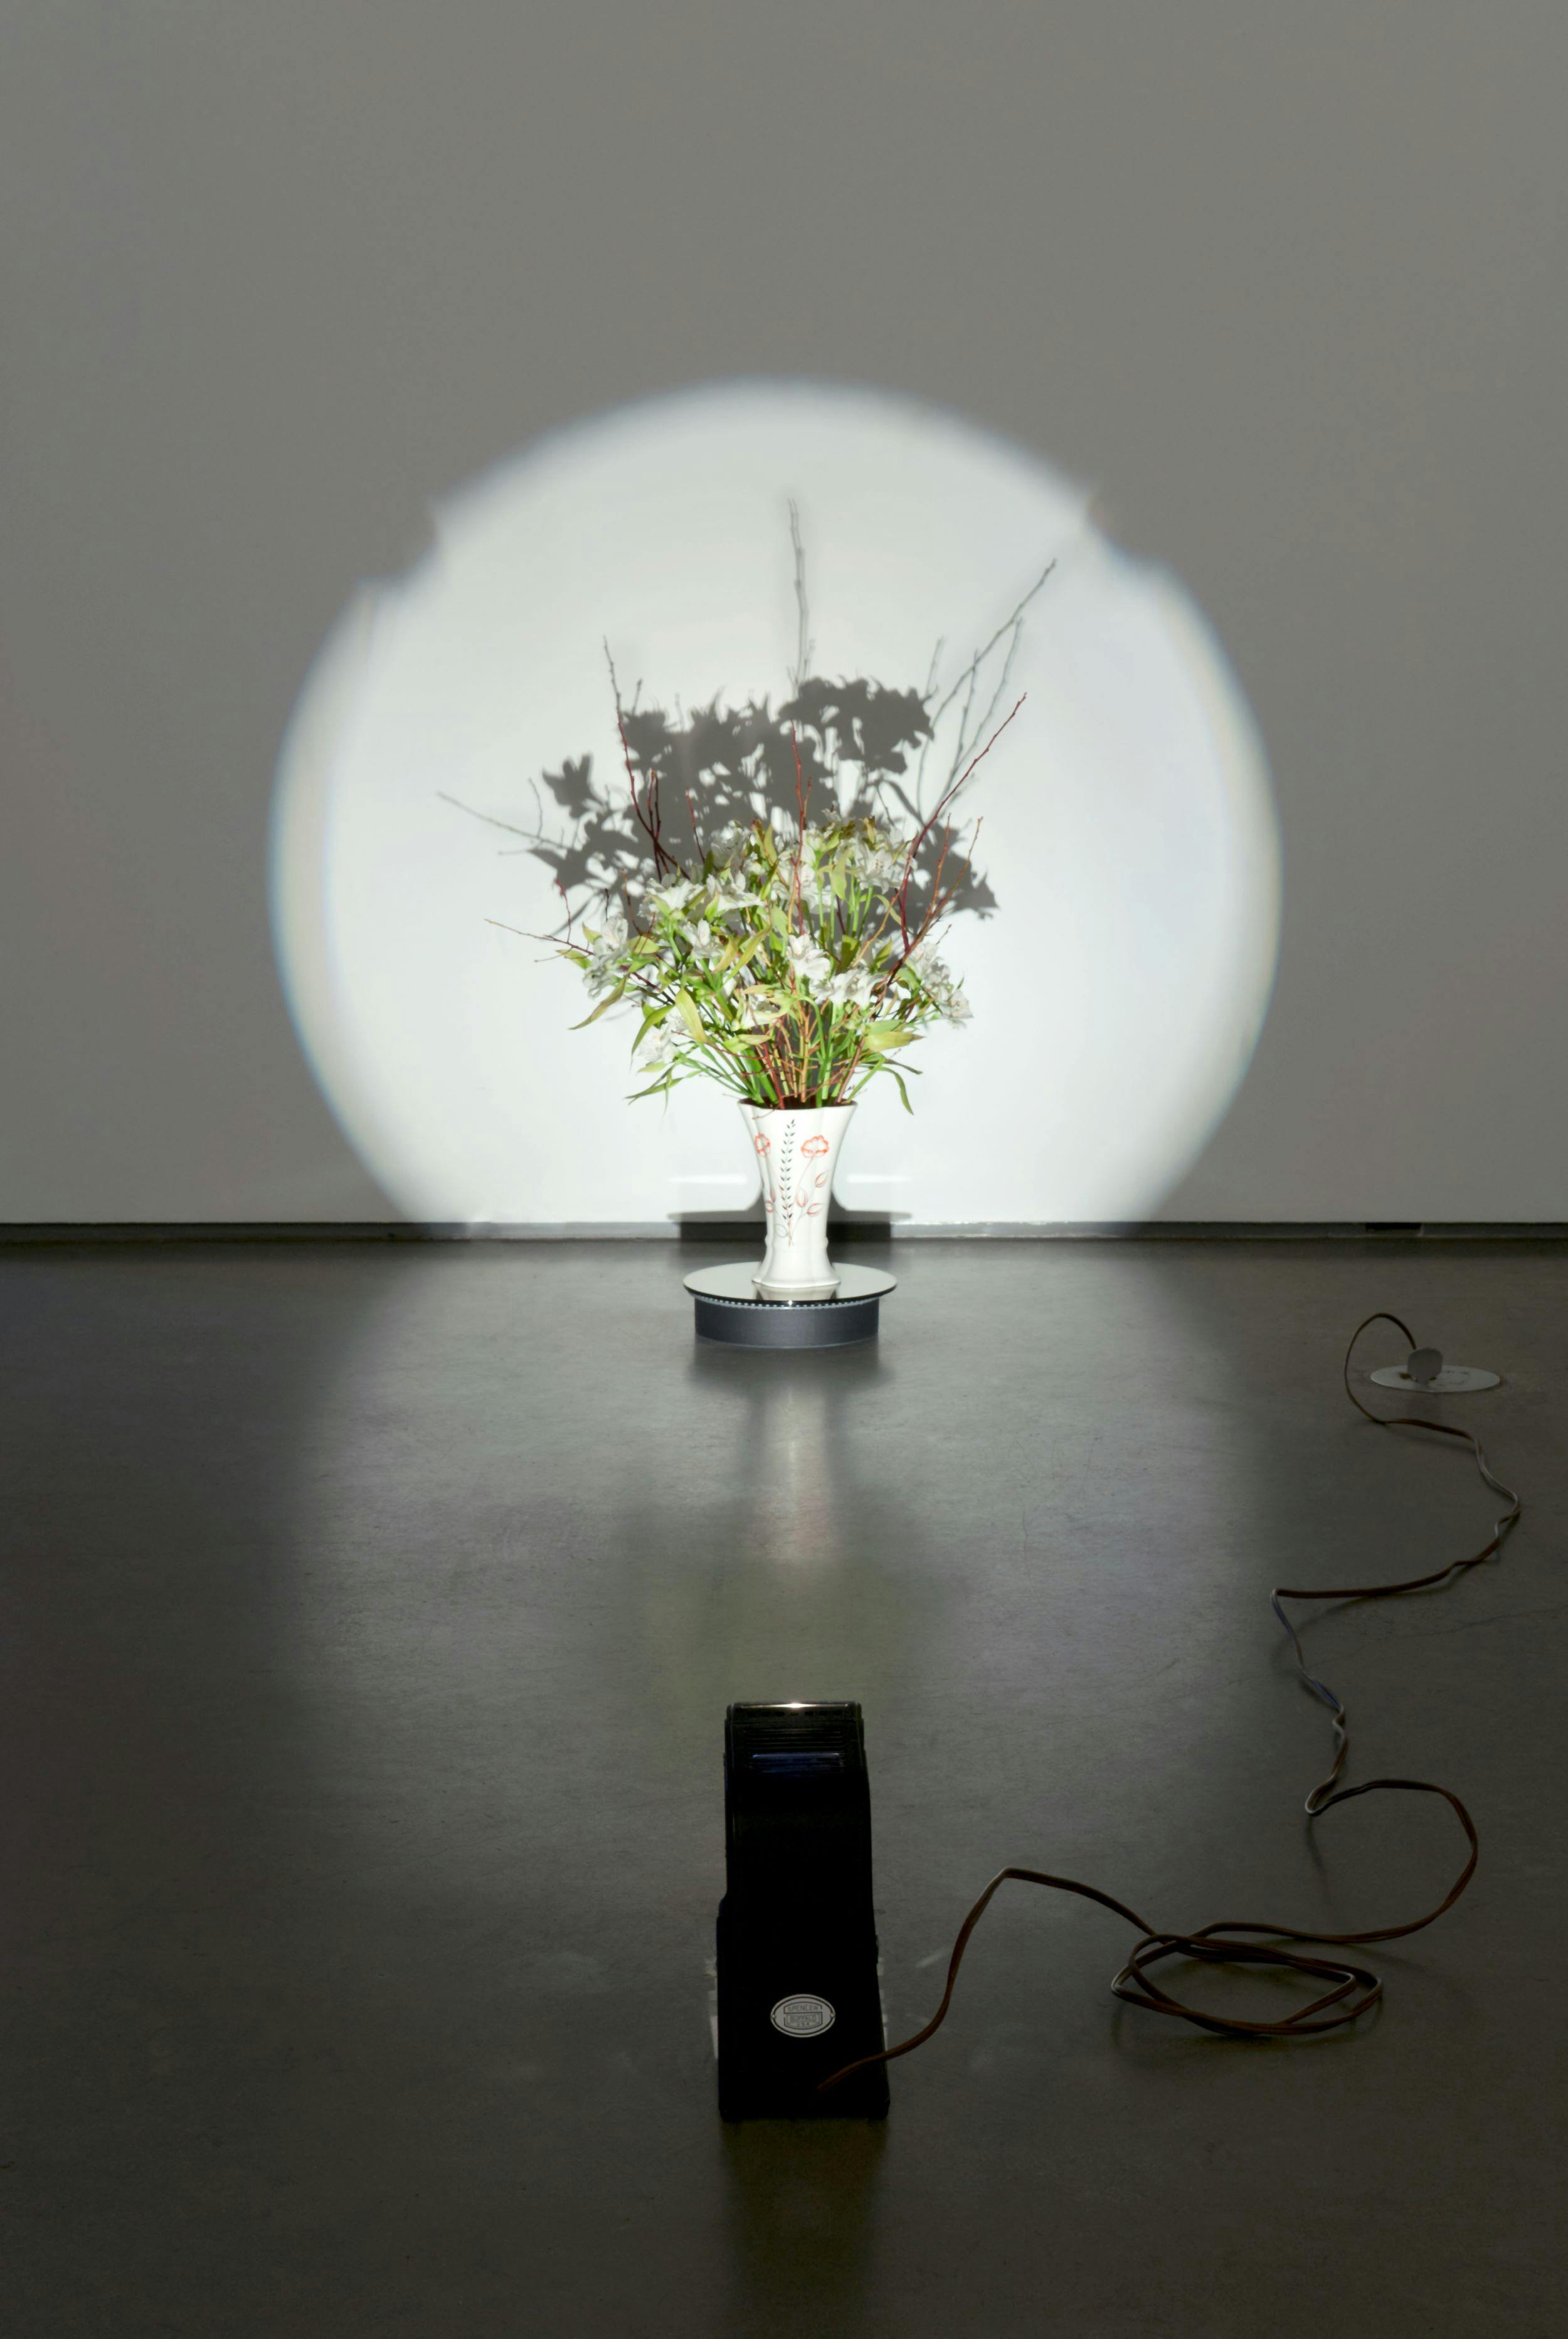 A bouquet of fresh flowers in a white ceramic vase on the floor of a gallery. A spotlight on the ground illuminates the bouquet, casting a stark shadow on the wall behind.